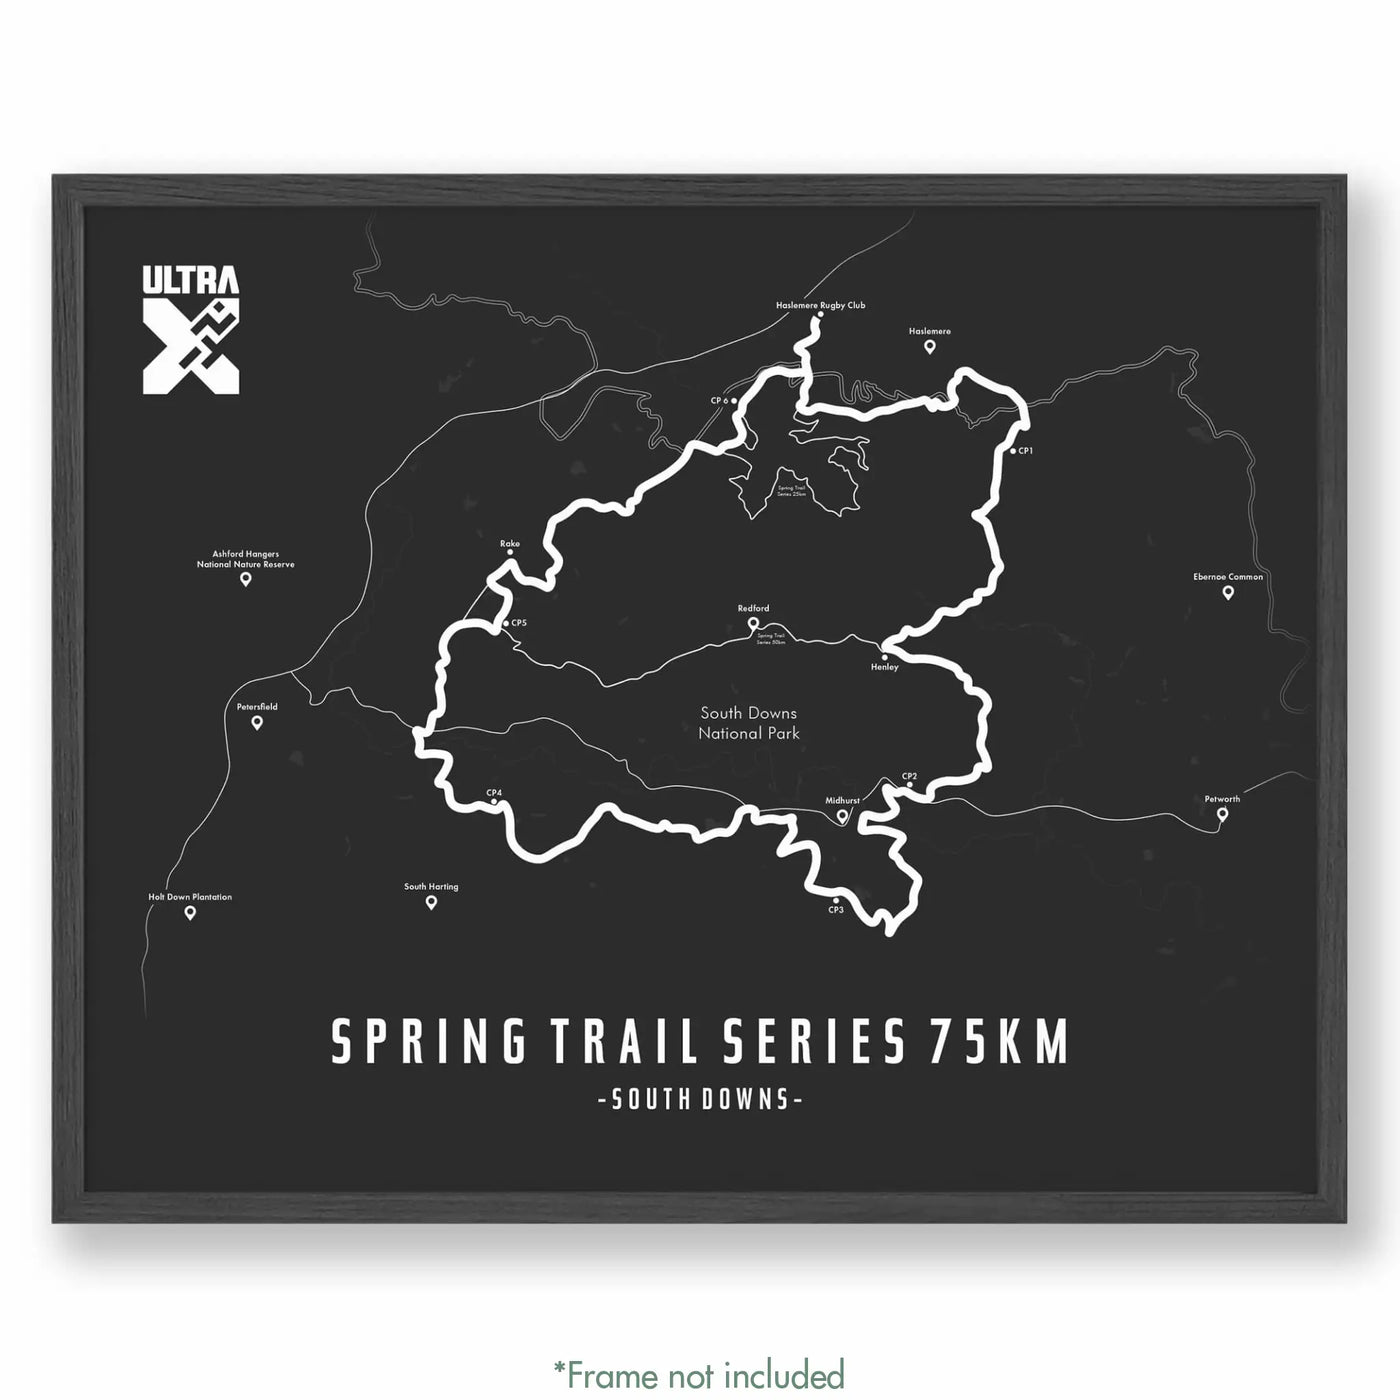 Trail Poster of Ultra X Spring Trail Series 75km - Grey